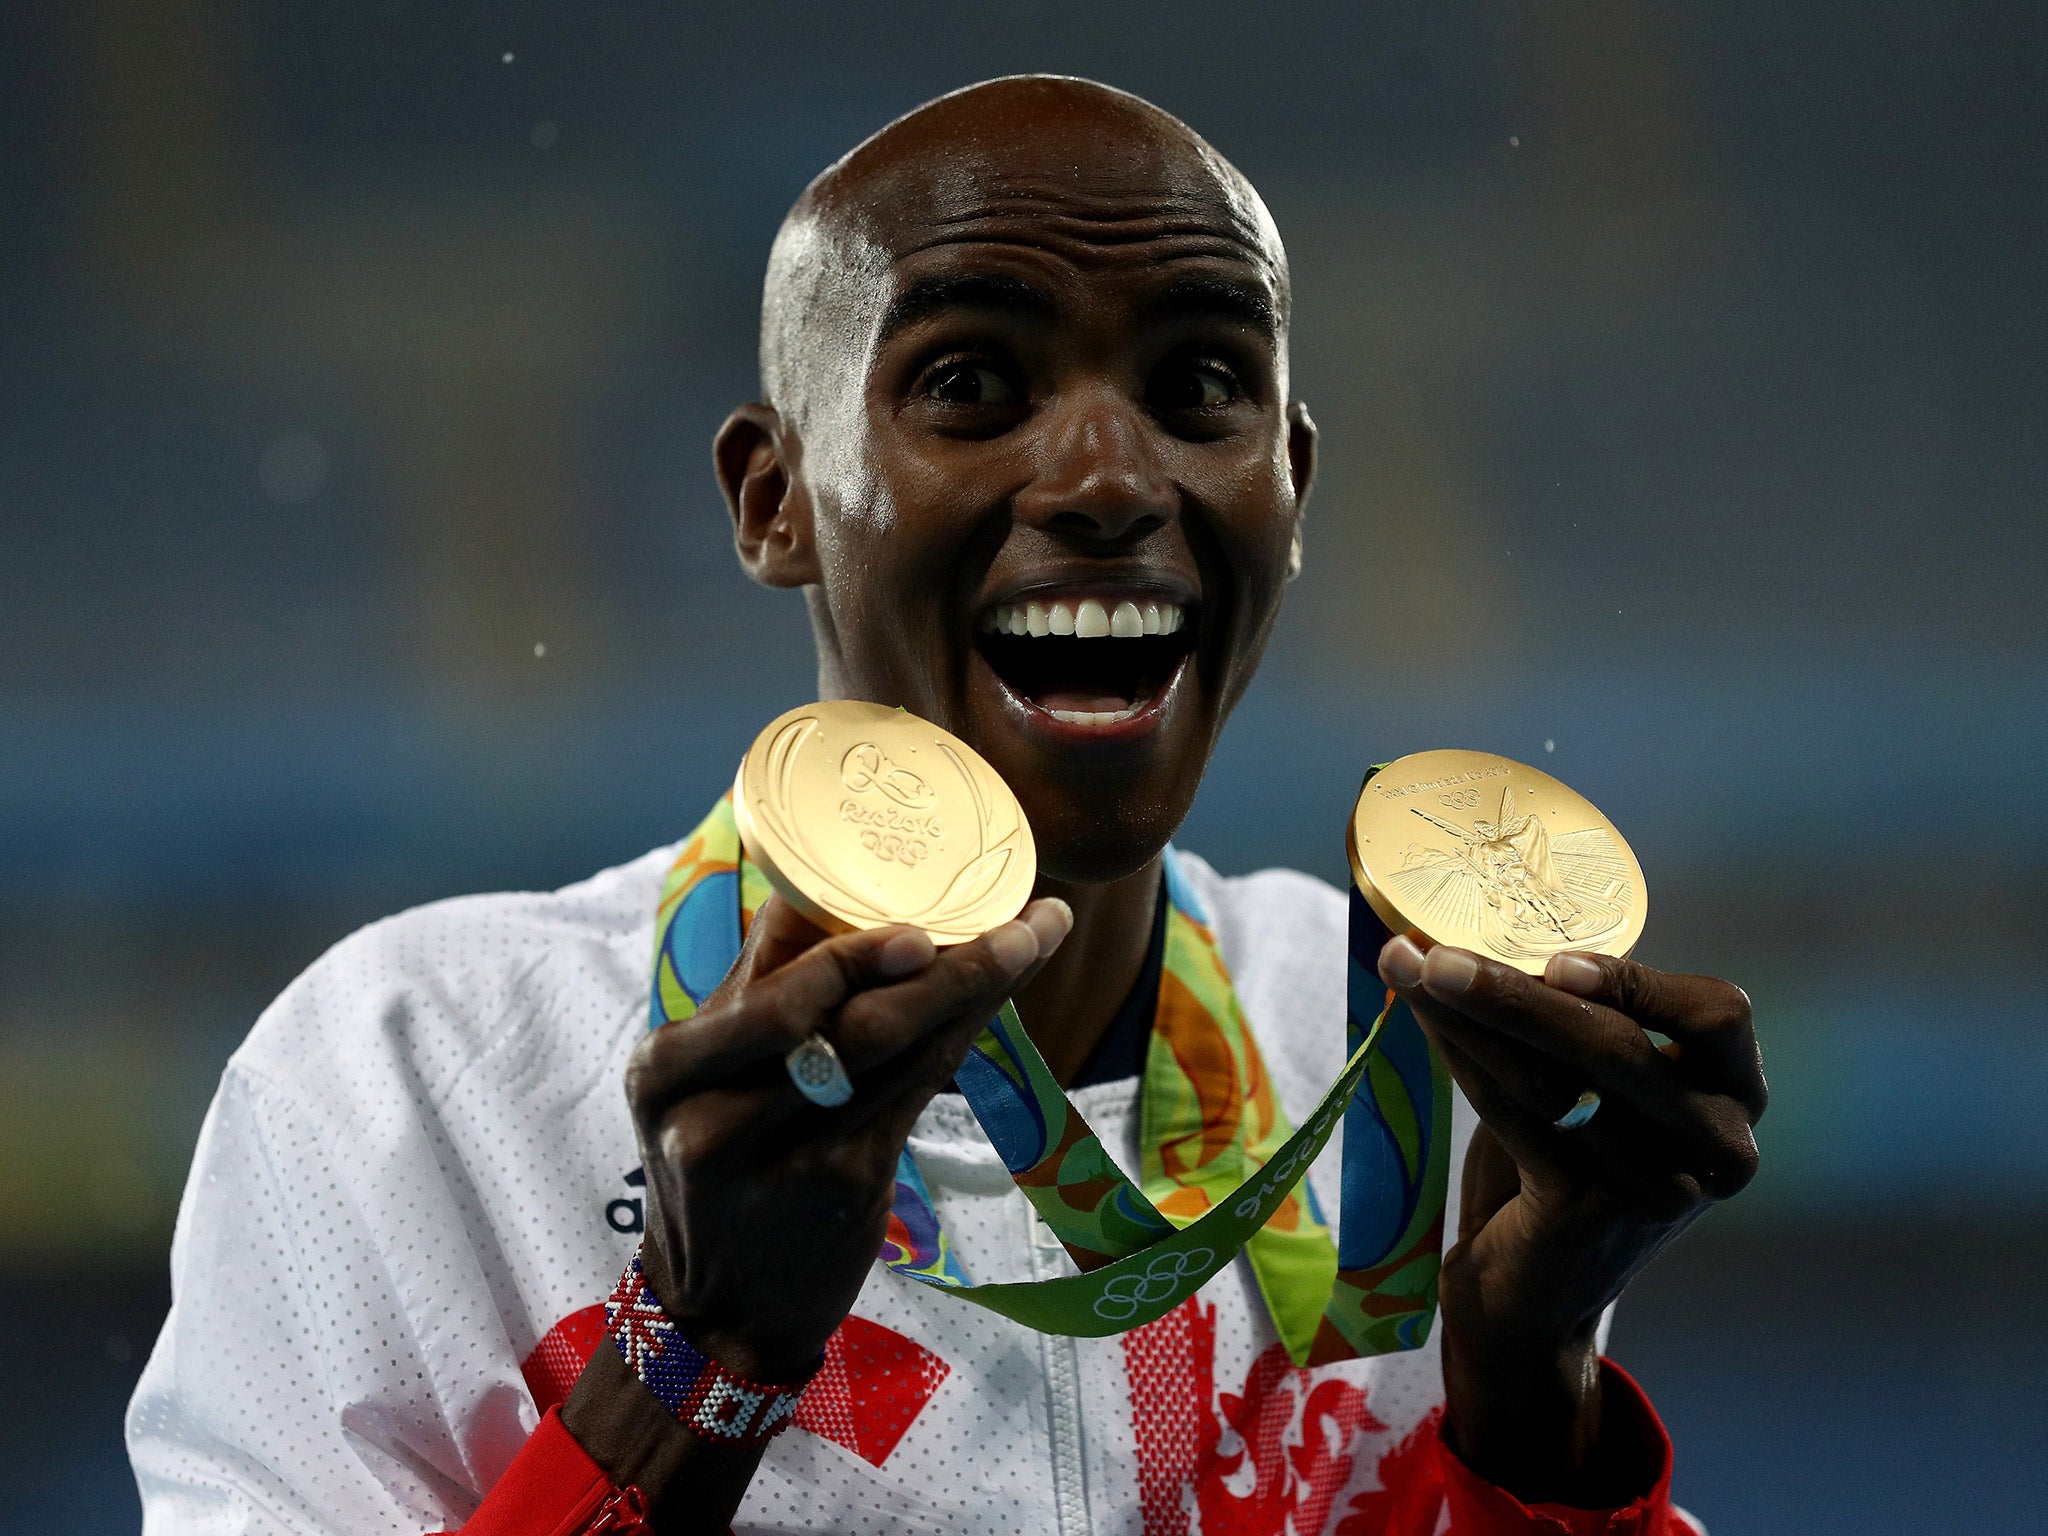 The four-time Olympic champion could be affected by the ban as he is currently out of the US, training in Ethiopia